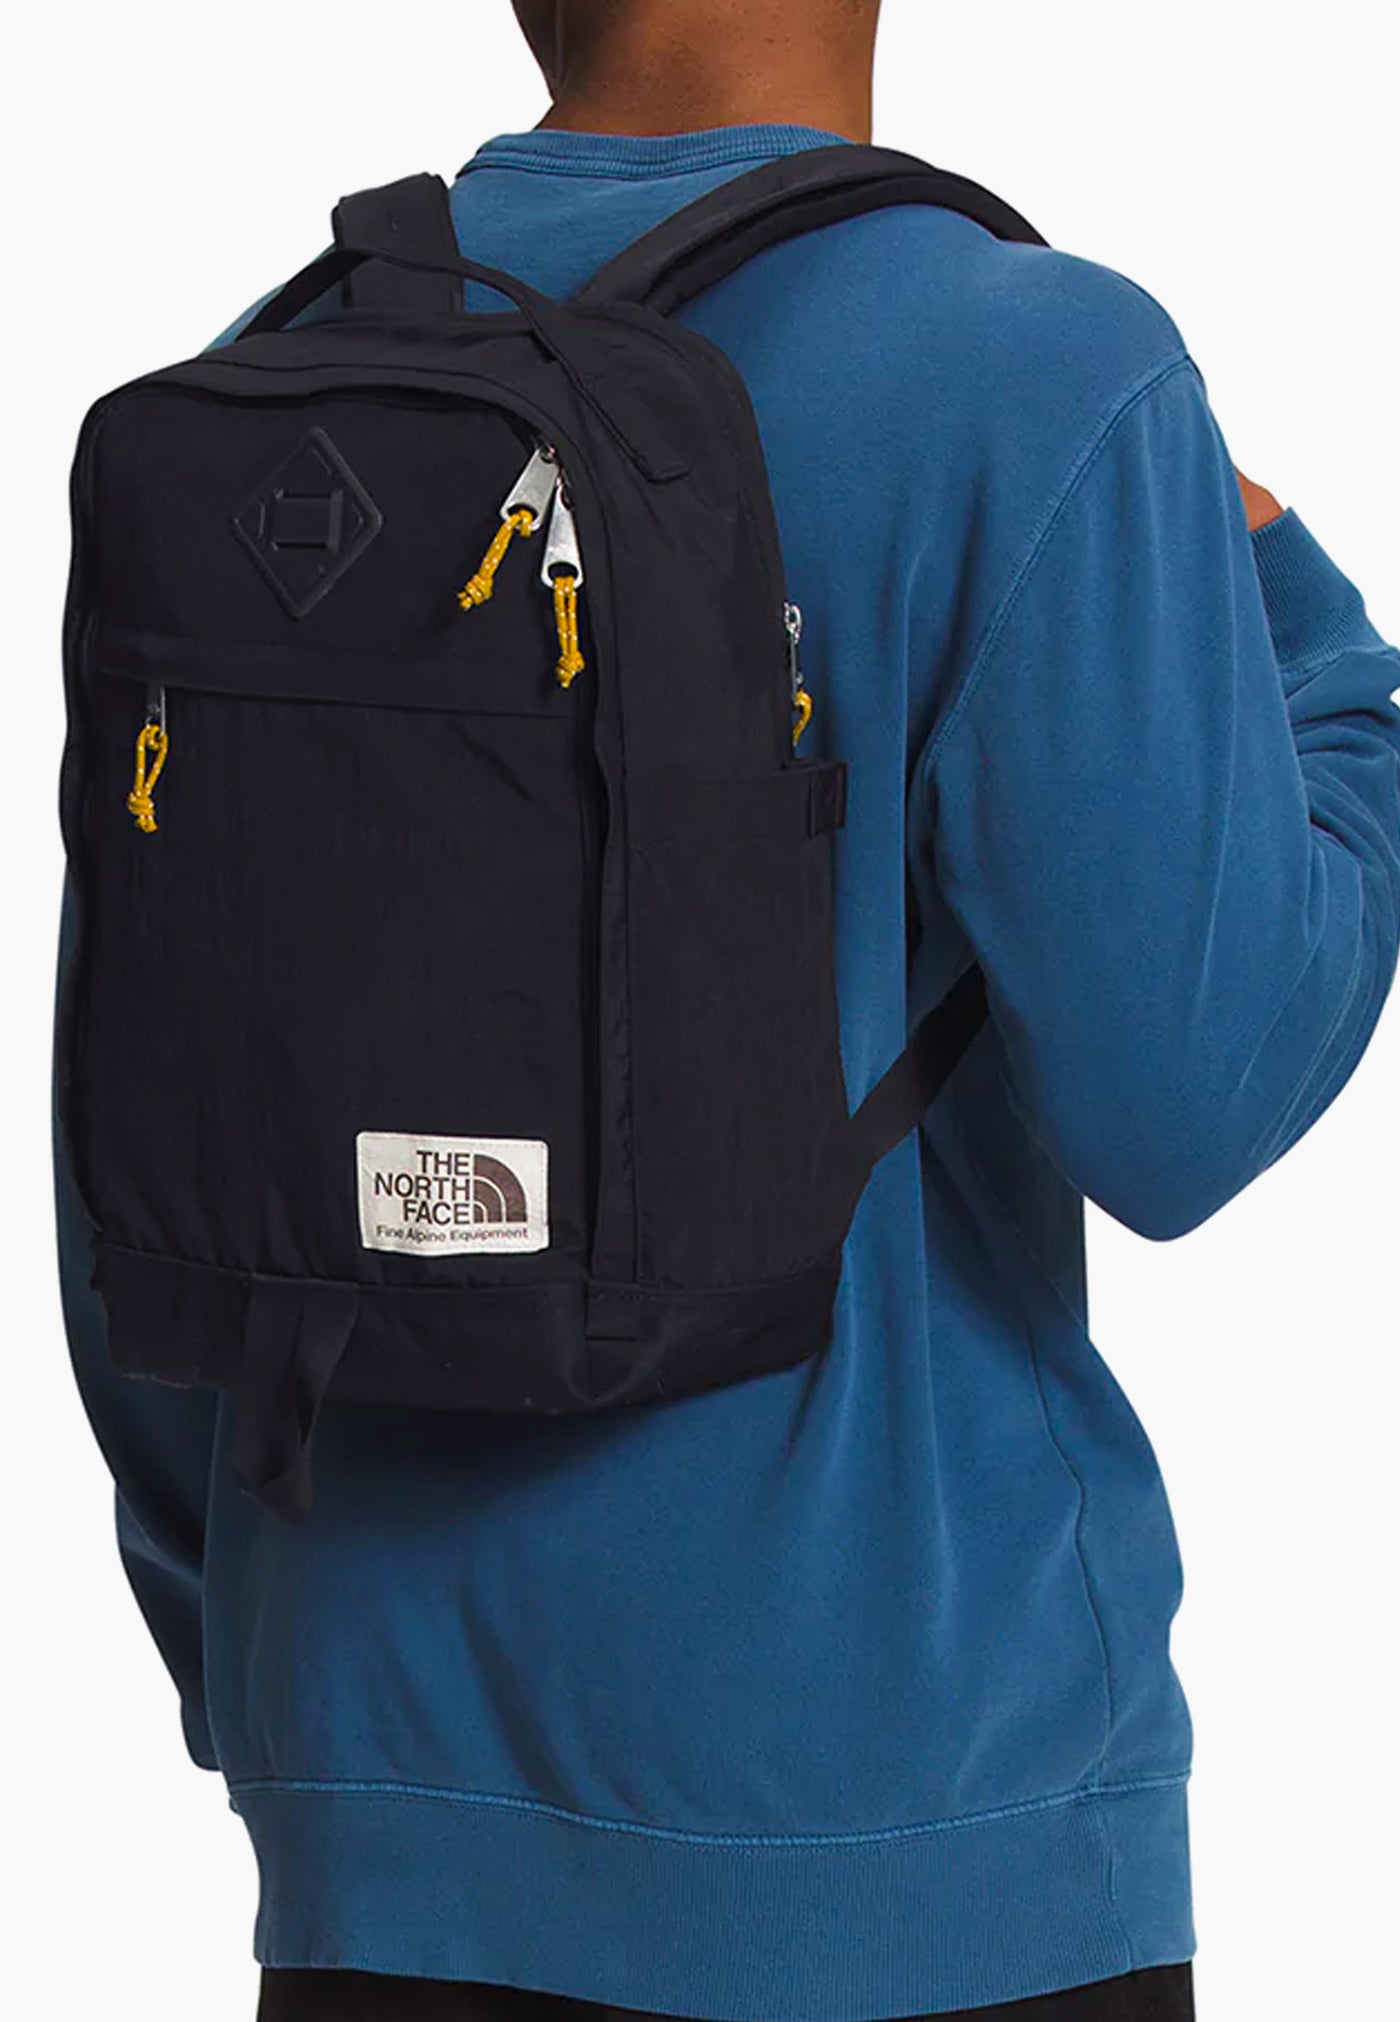 The North Face | Buy Berkeley Daypack - Black/Mineral Gold online